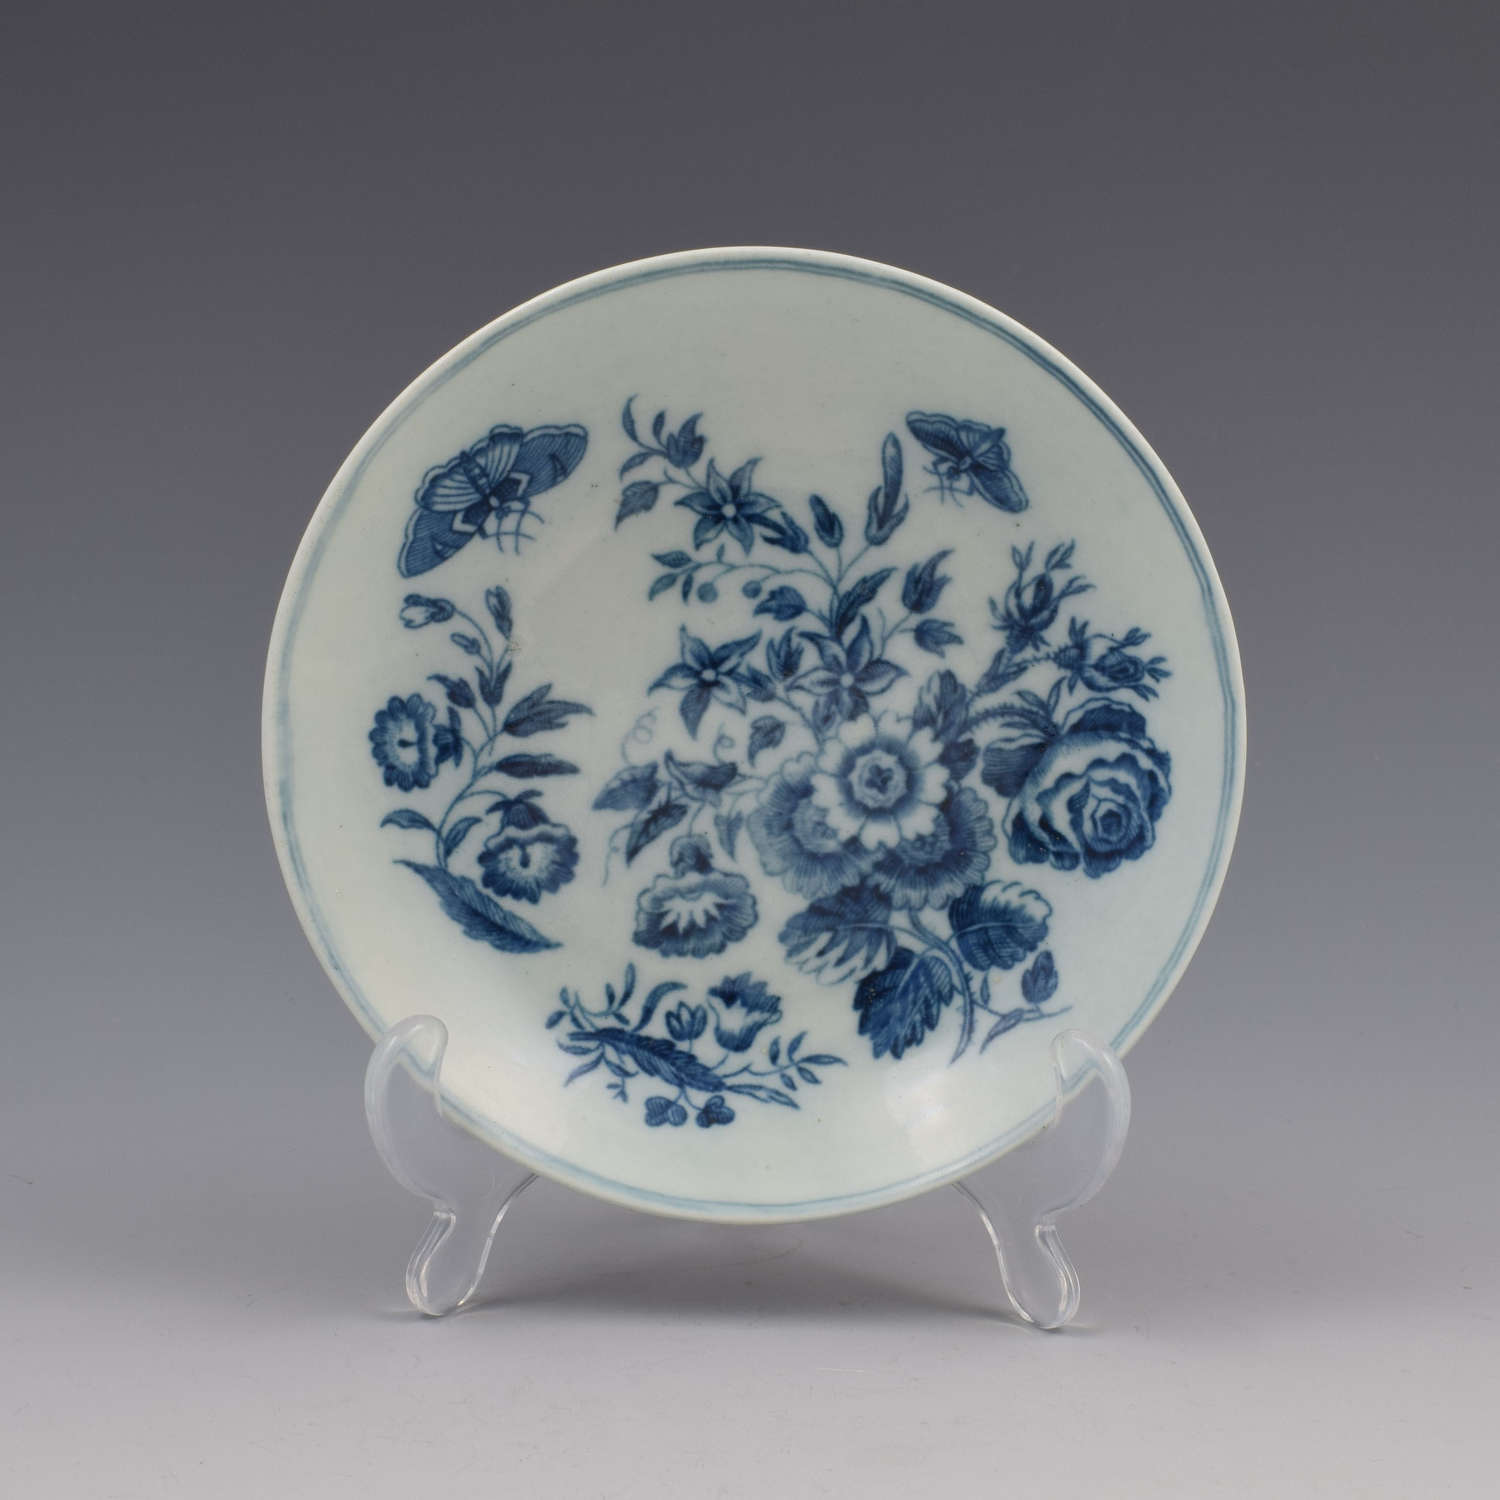 First Period Worcester Porcelain Three Flowers Pattern Saucer c.1770